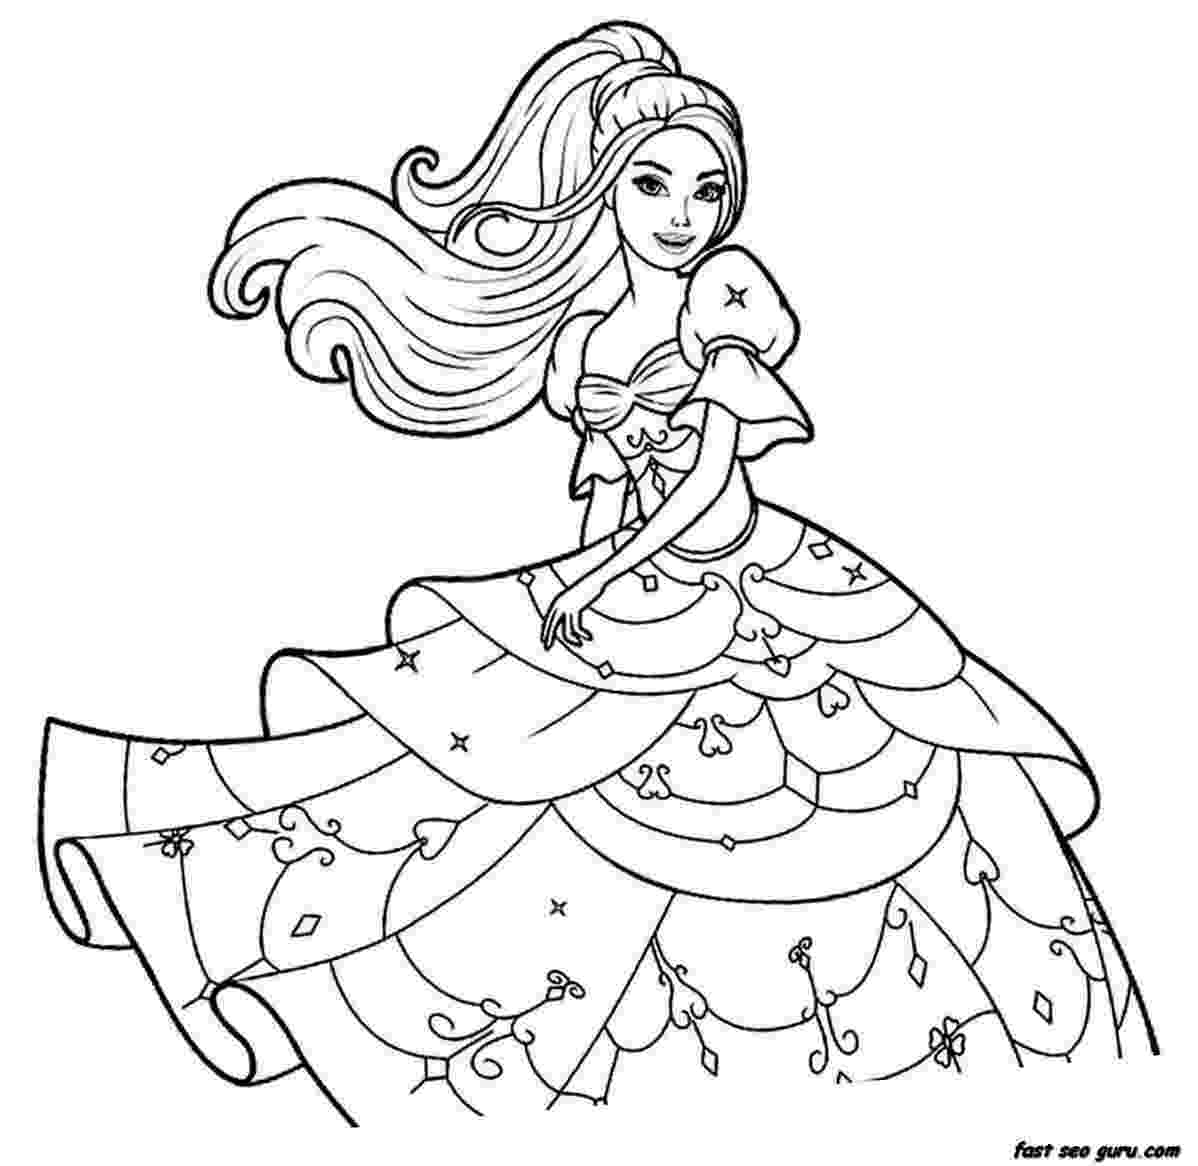 printable coloring sheets for girls cute girl coloring pages to download and print for free sheets printable for coloring girls 